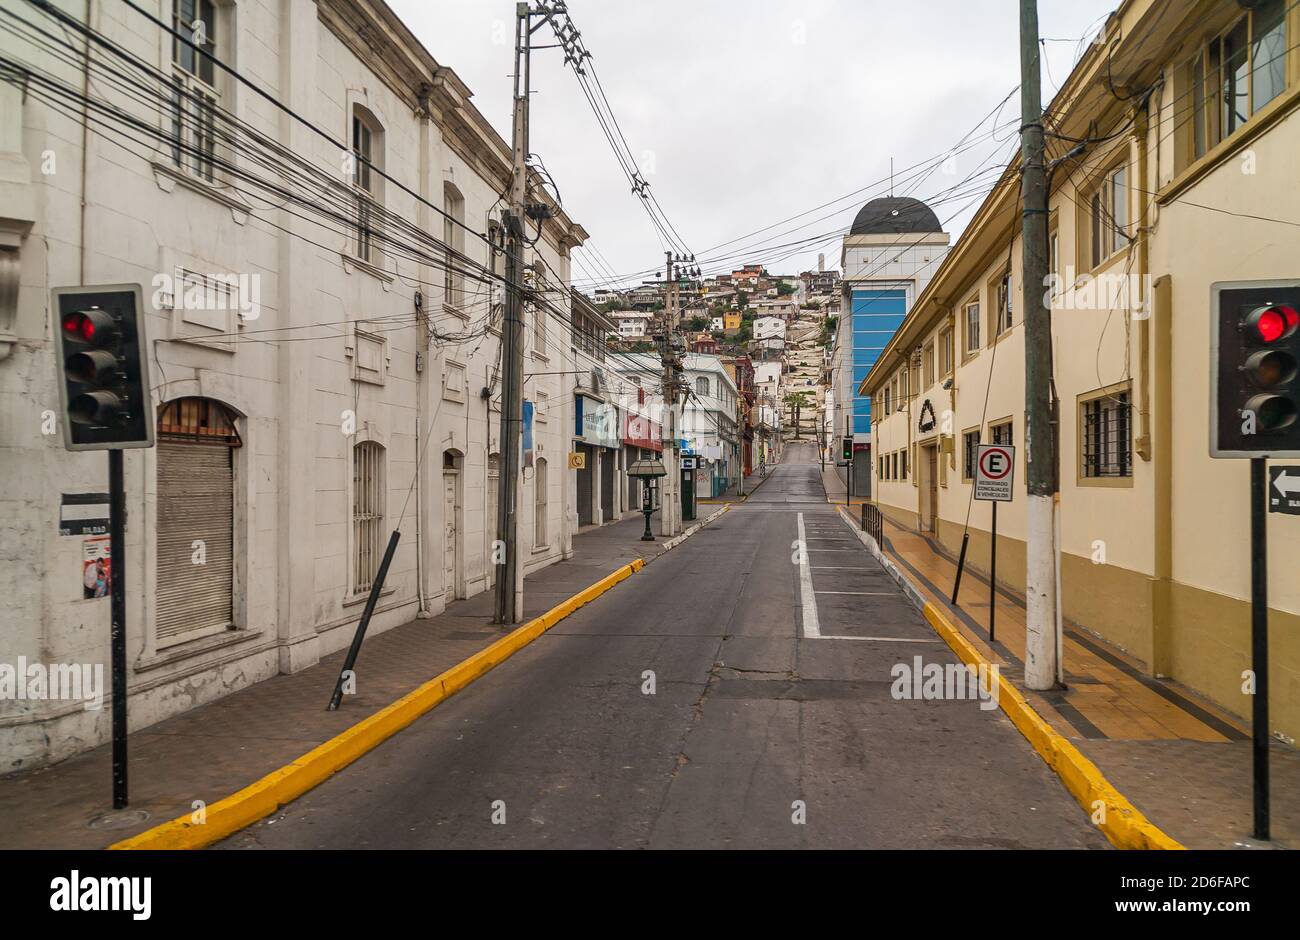 Coquimbo, Chile - December 7, 2008: Early morning produces an empty street with housing and closed businesses on both sides under silver sky. Stock Photo